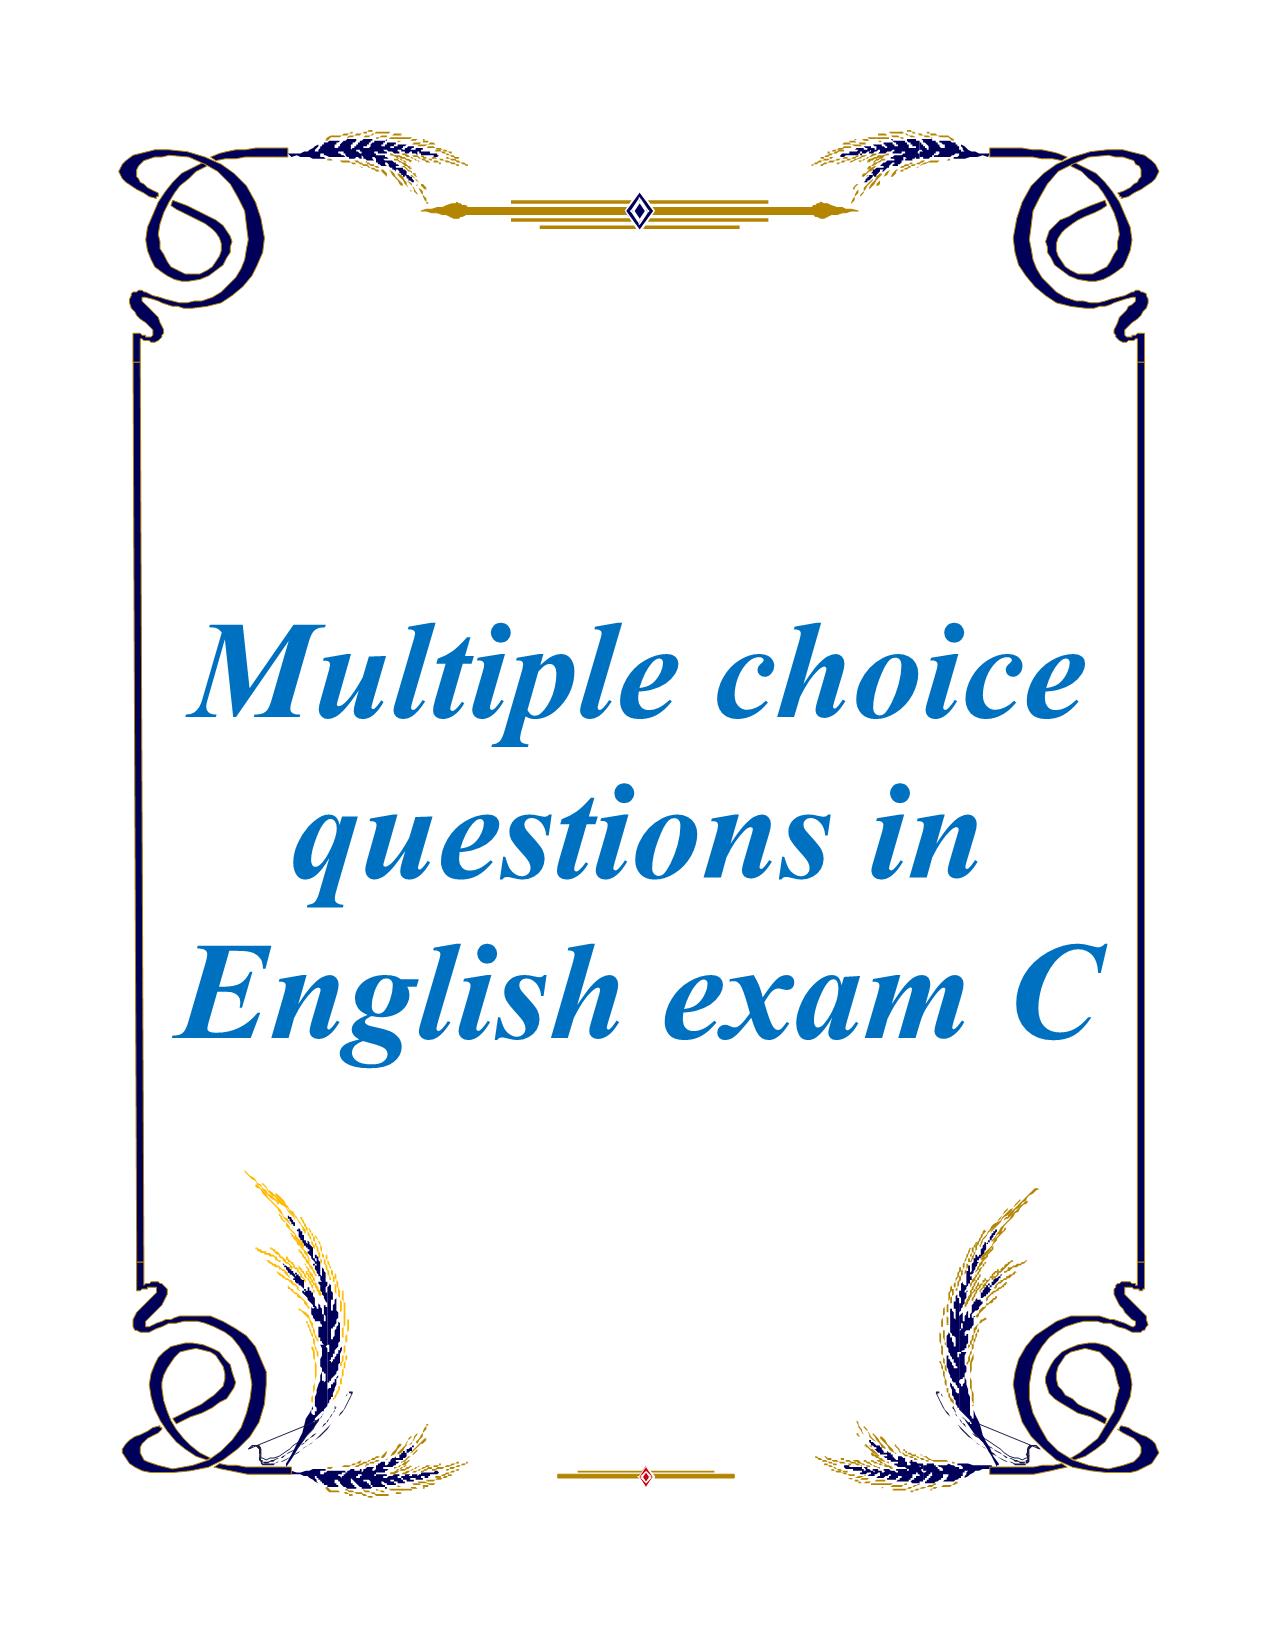 Multiple choice questions in English exam C trang 1